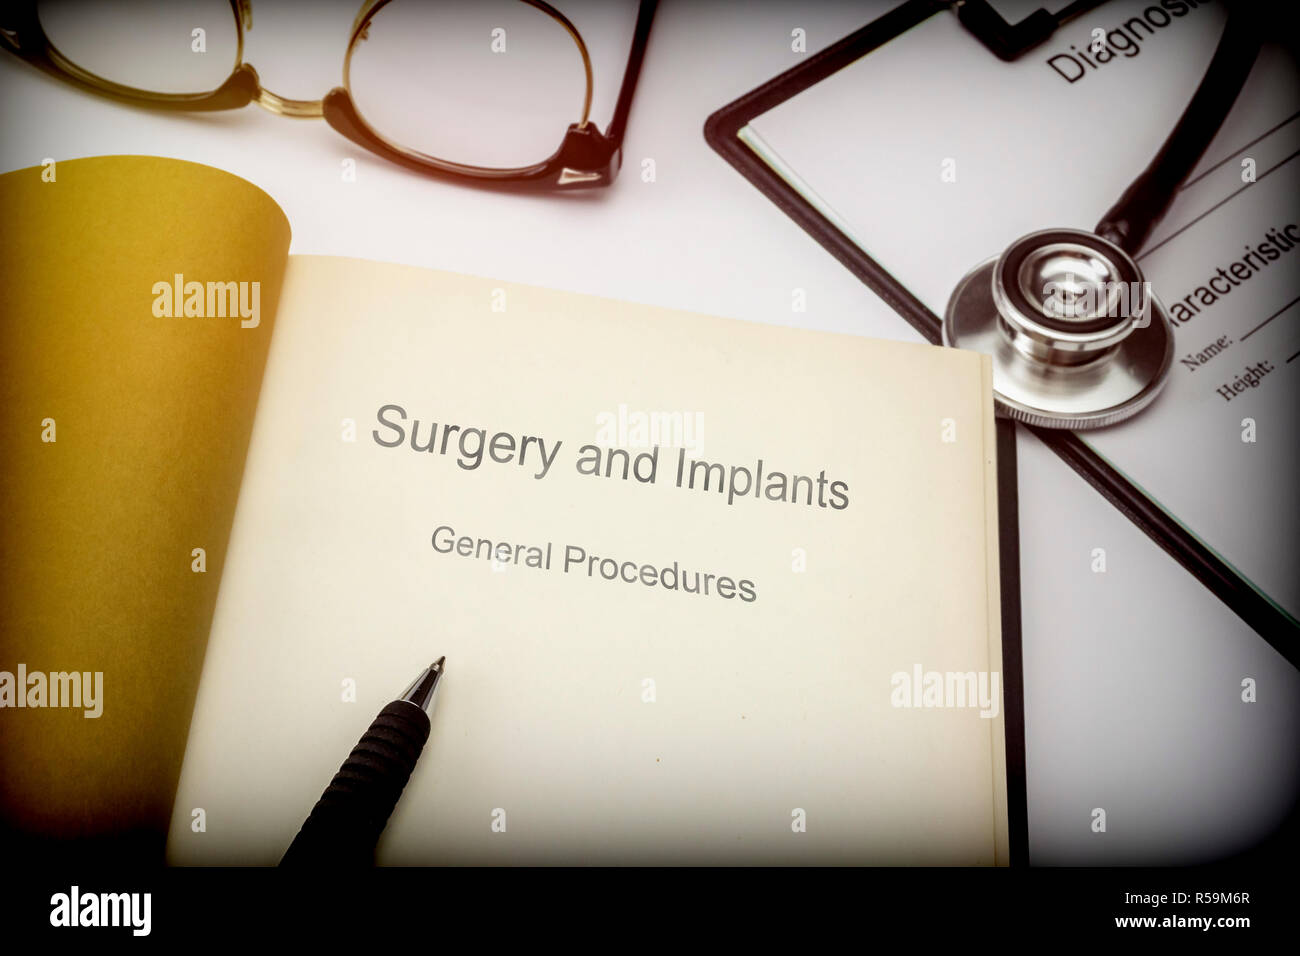 Titled book Surgery and implants general procedures along with medical equipment, conceptual image Stock Photo